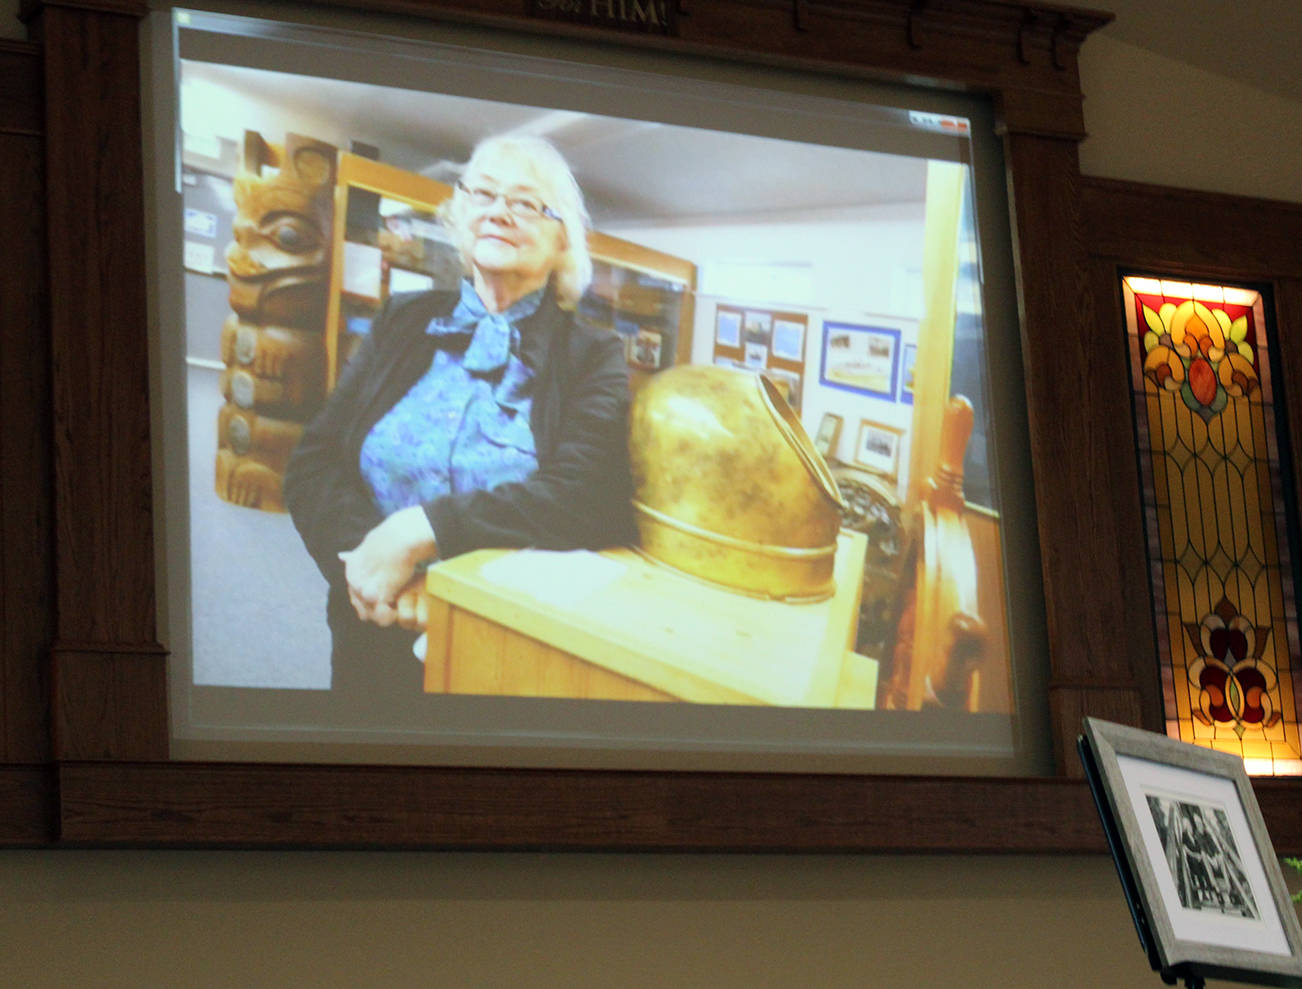 Woodwick lauded for legacy of curiosity, kindness